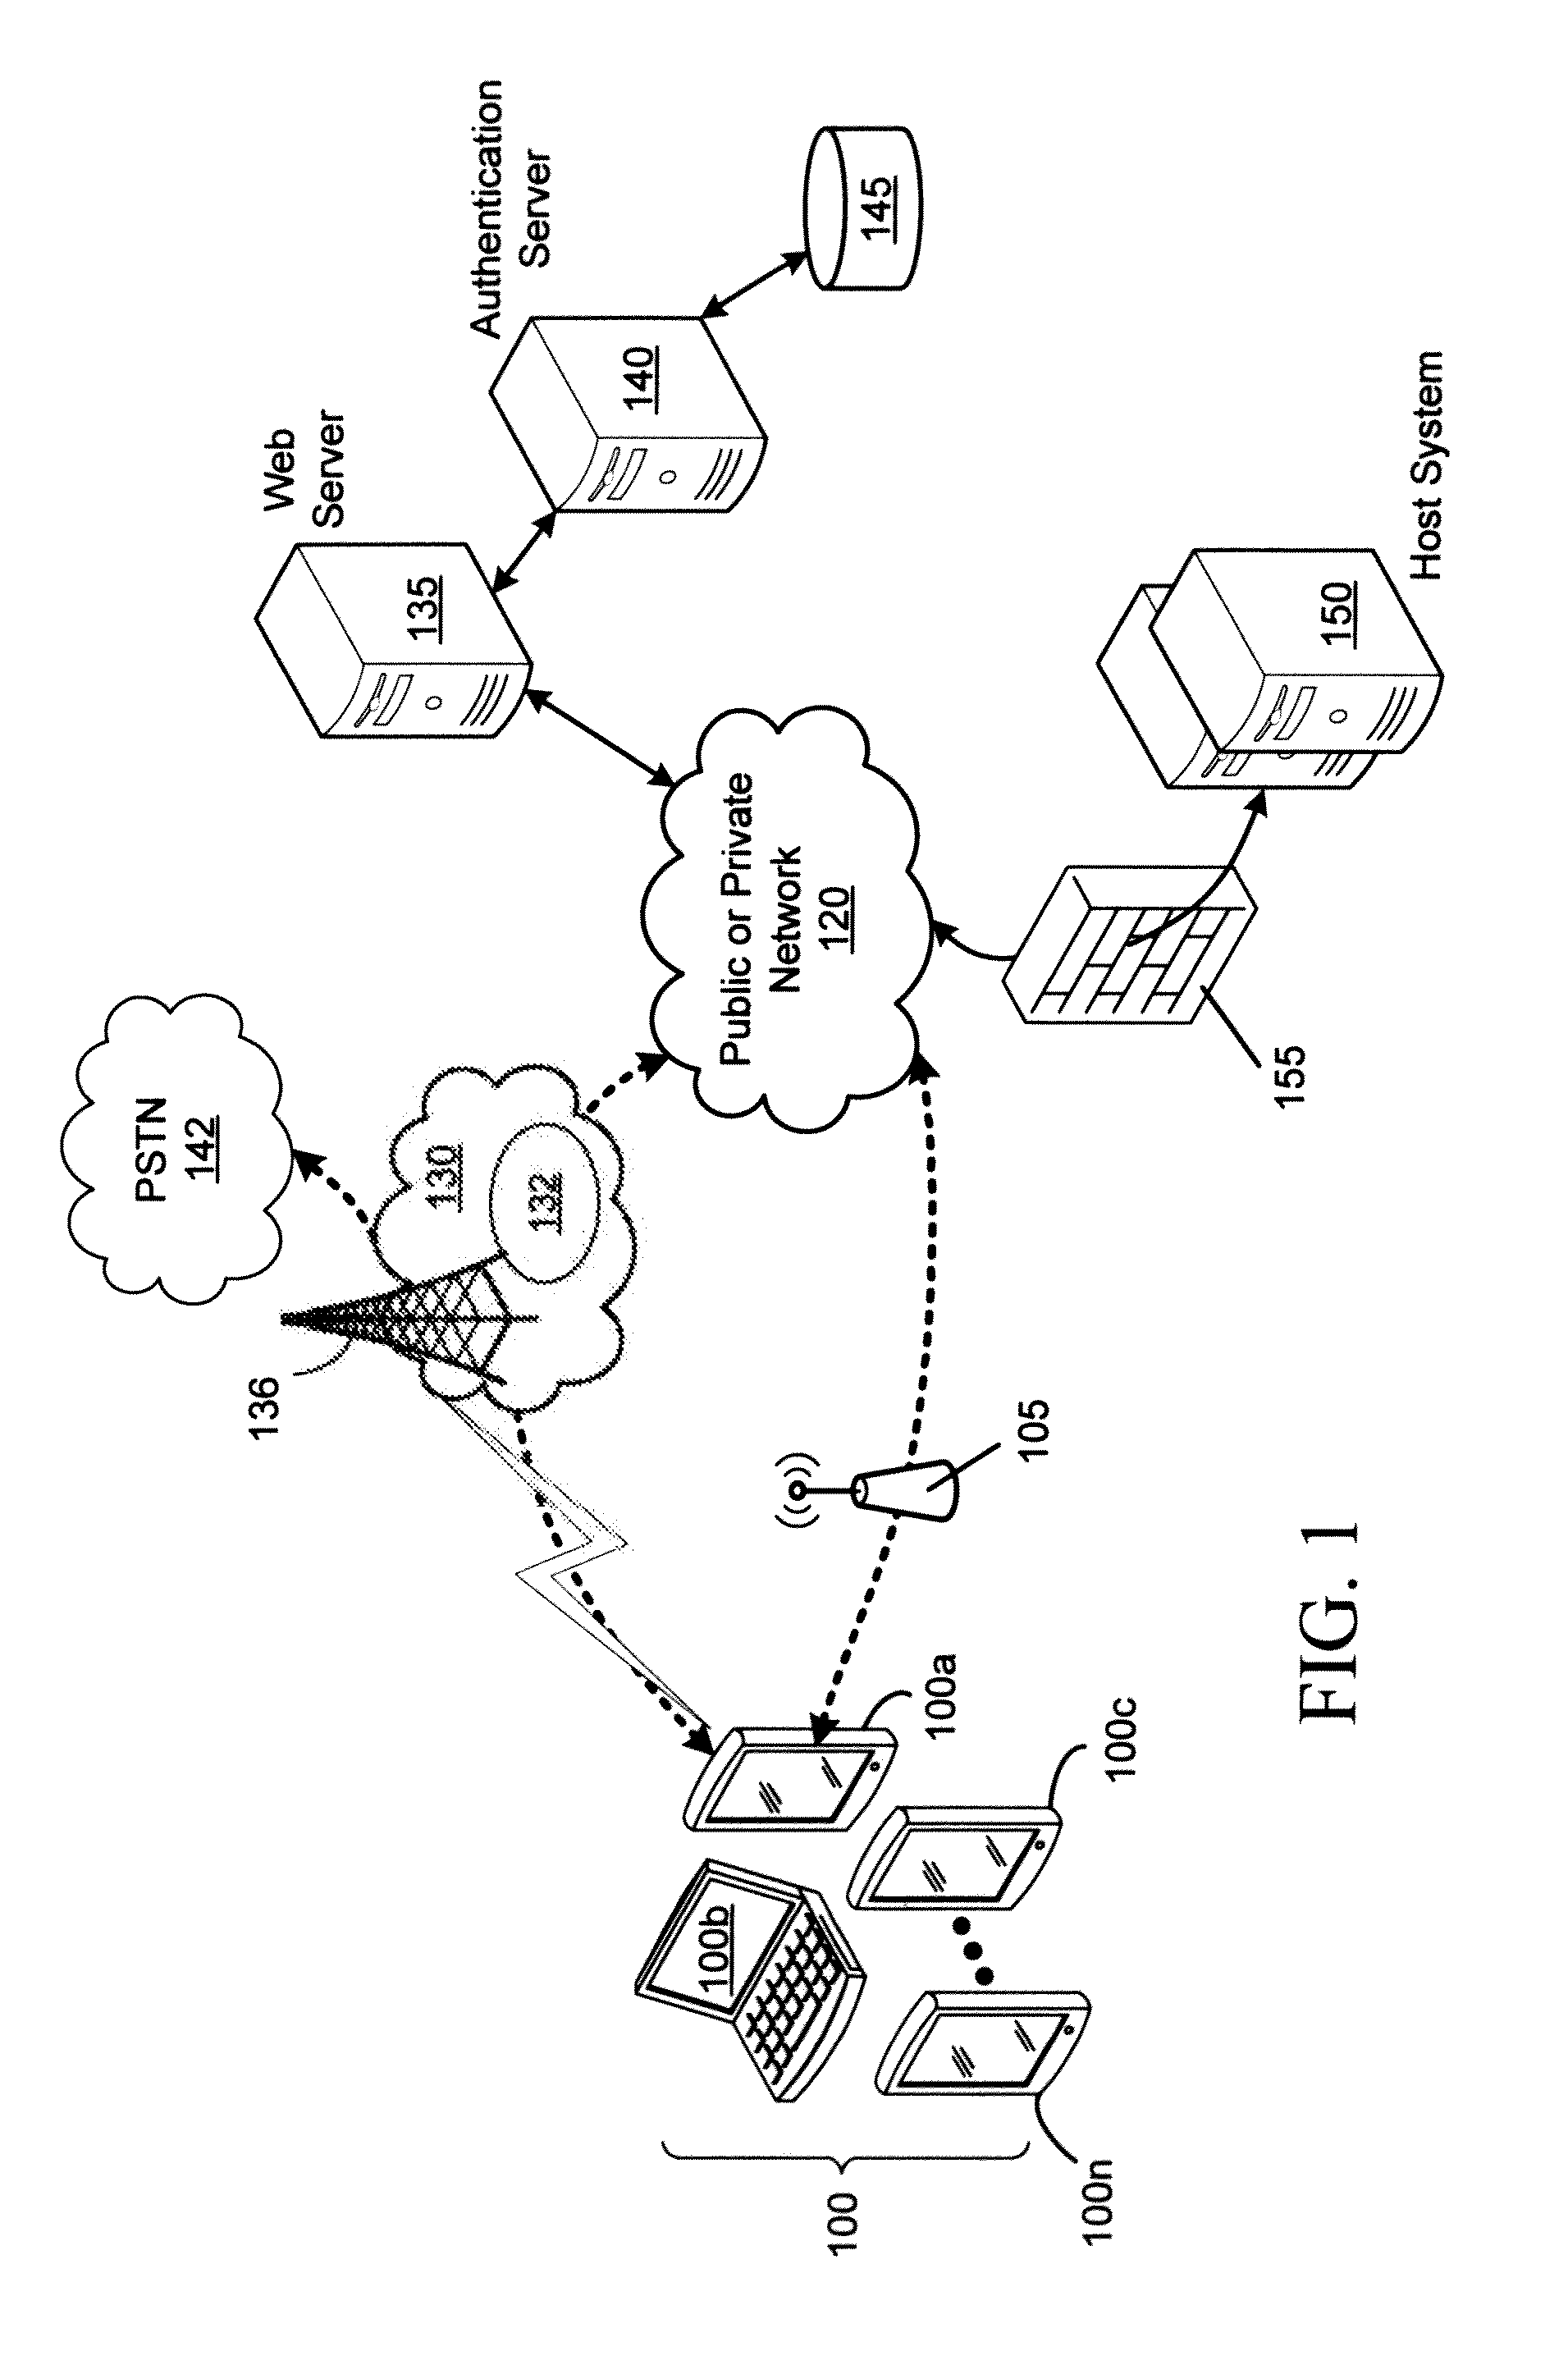 Mitigation of application-level distributed denial-of-service attacks